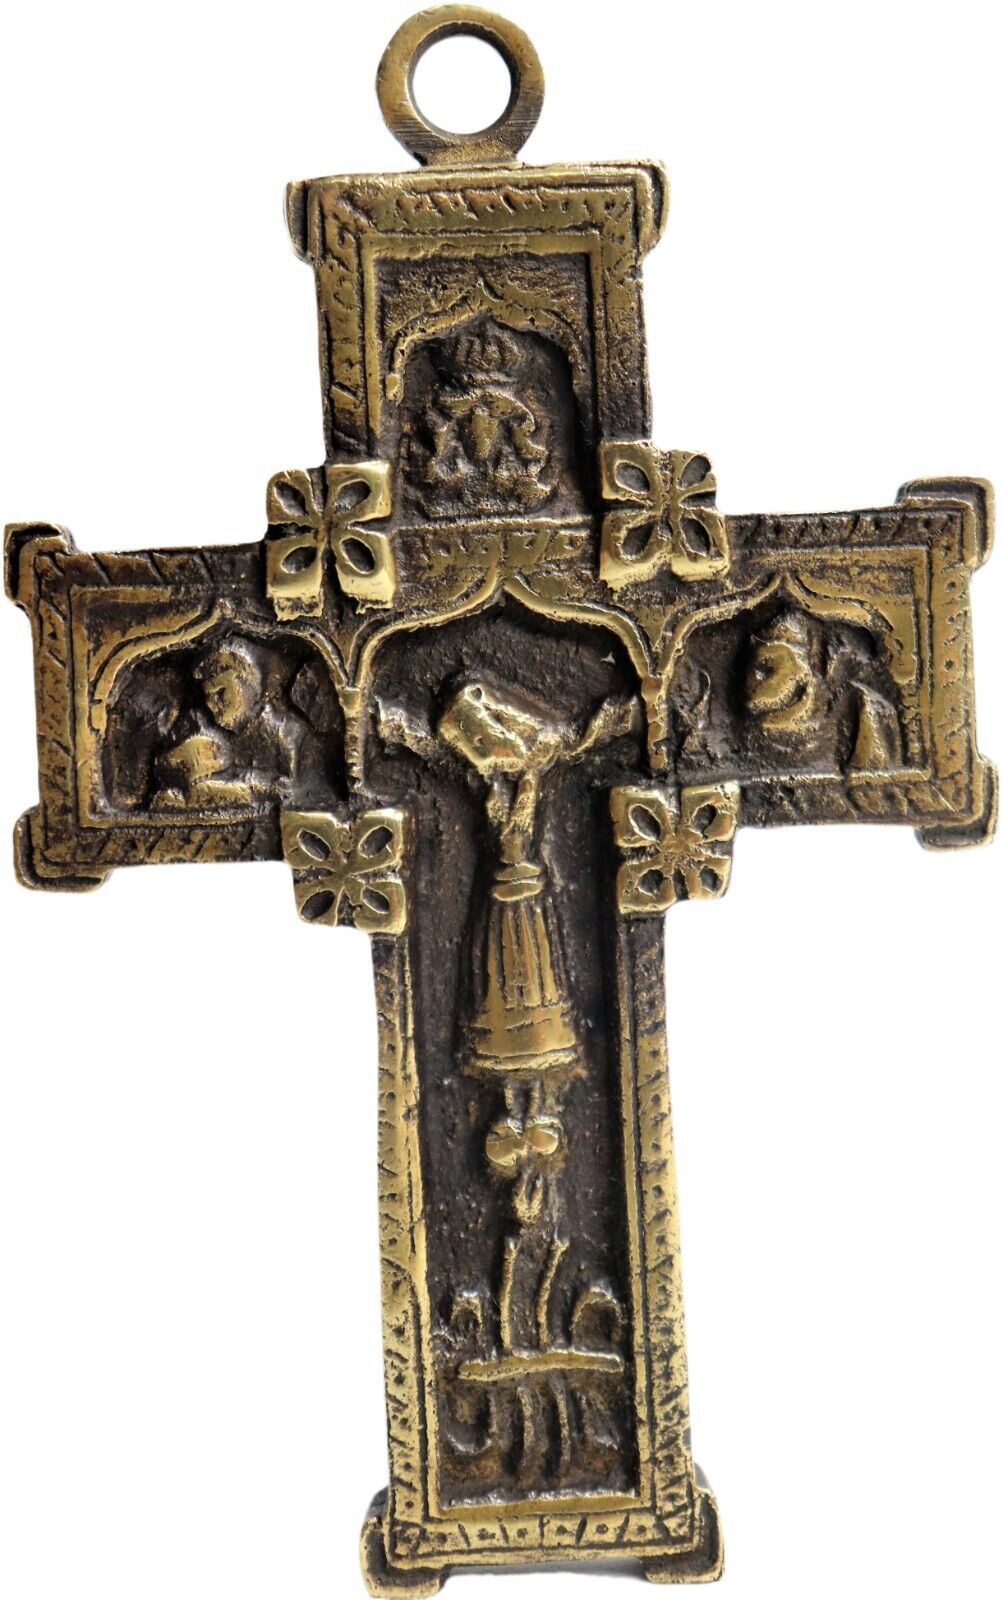 Antique ornate solid bronze Catholic pectoral crucifix from the 1920s